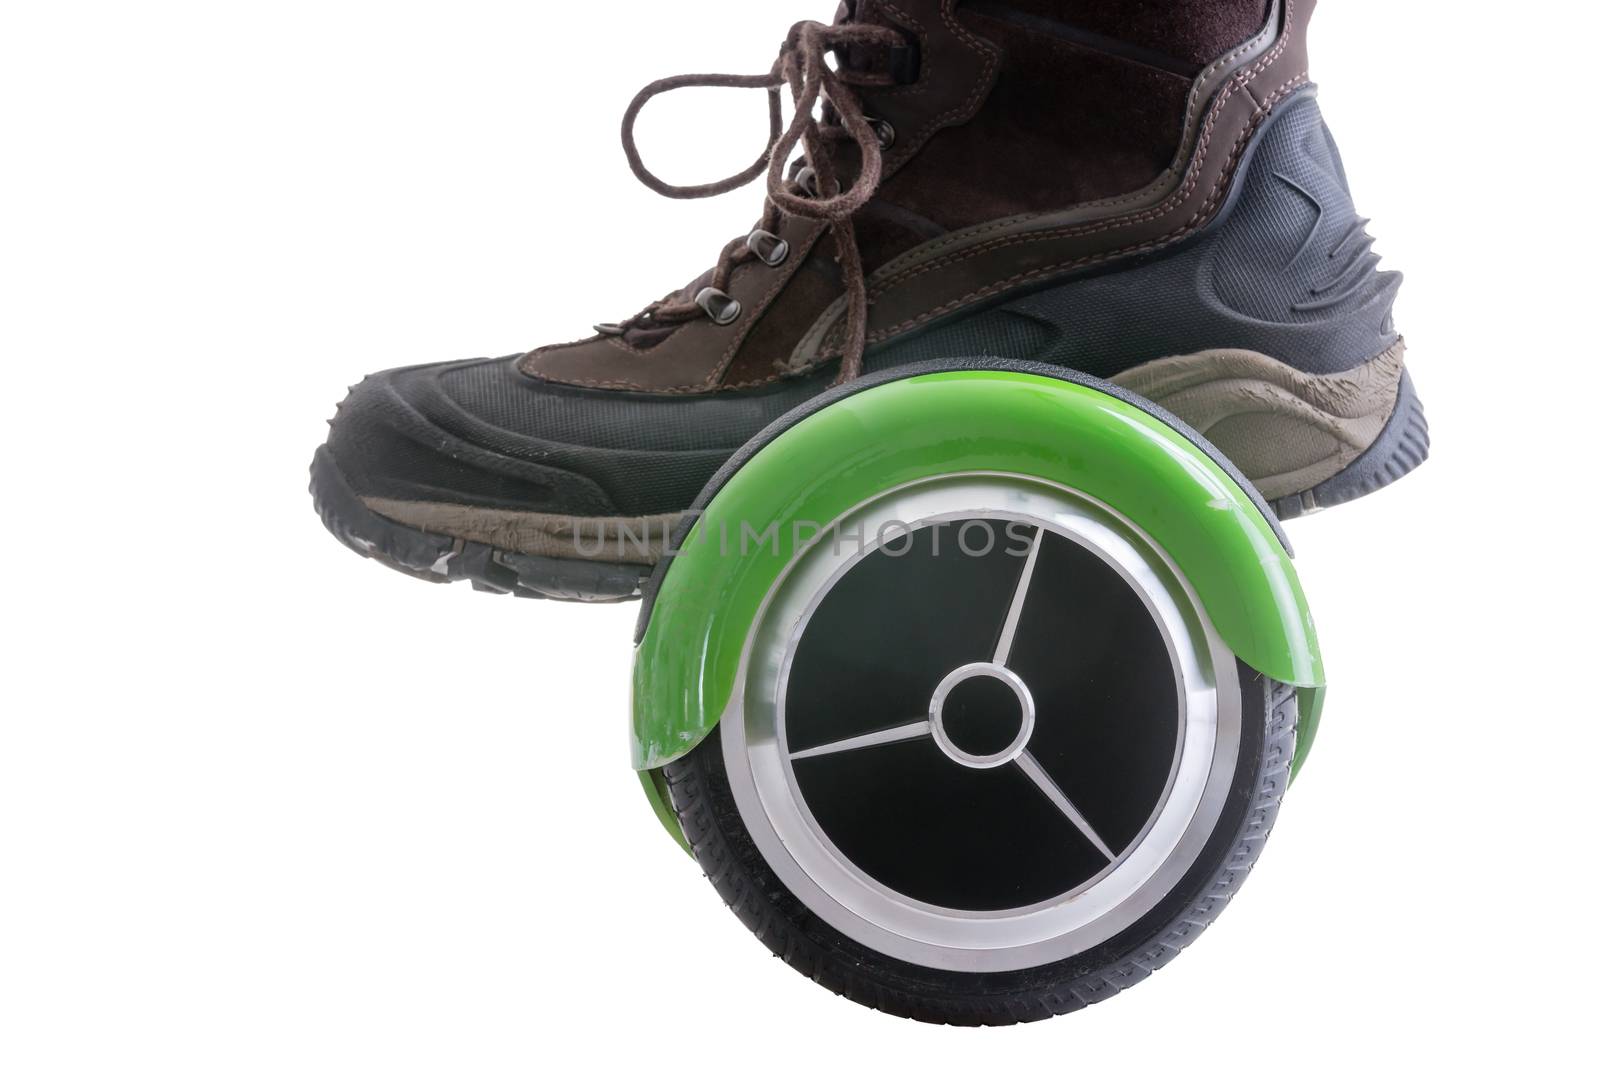 Big boot riding a hover board by coskun